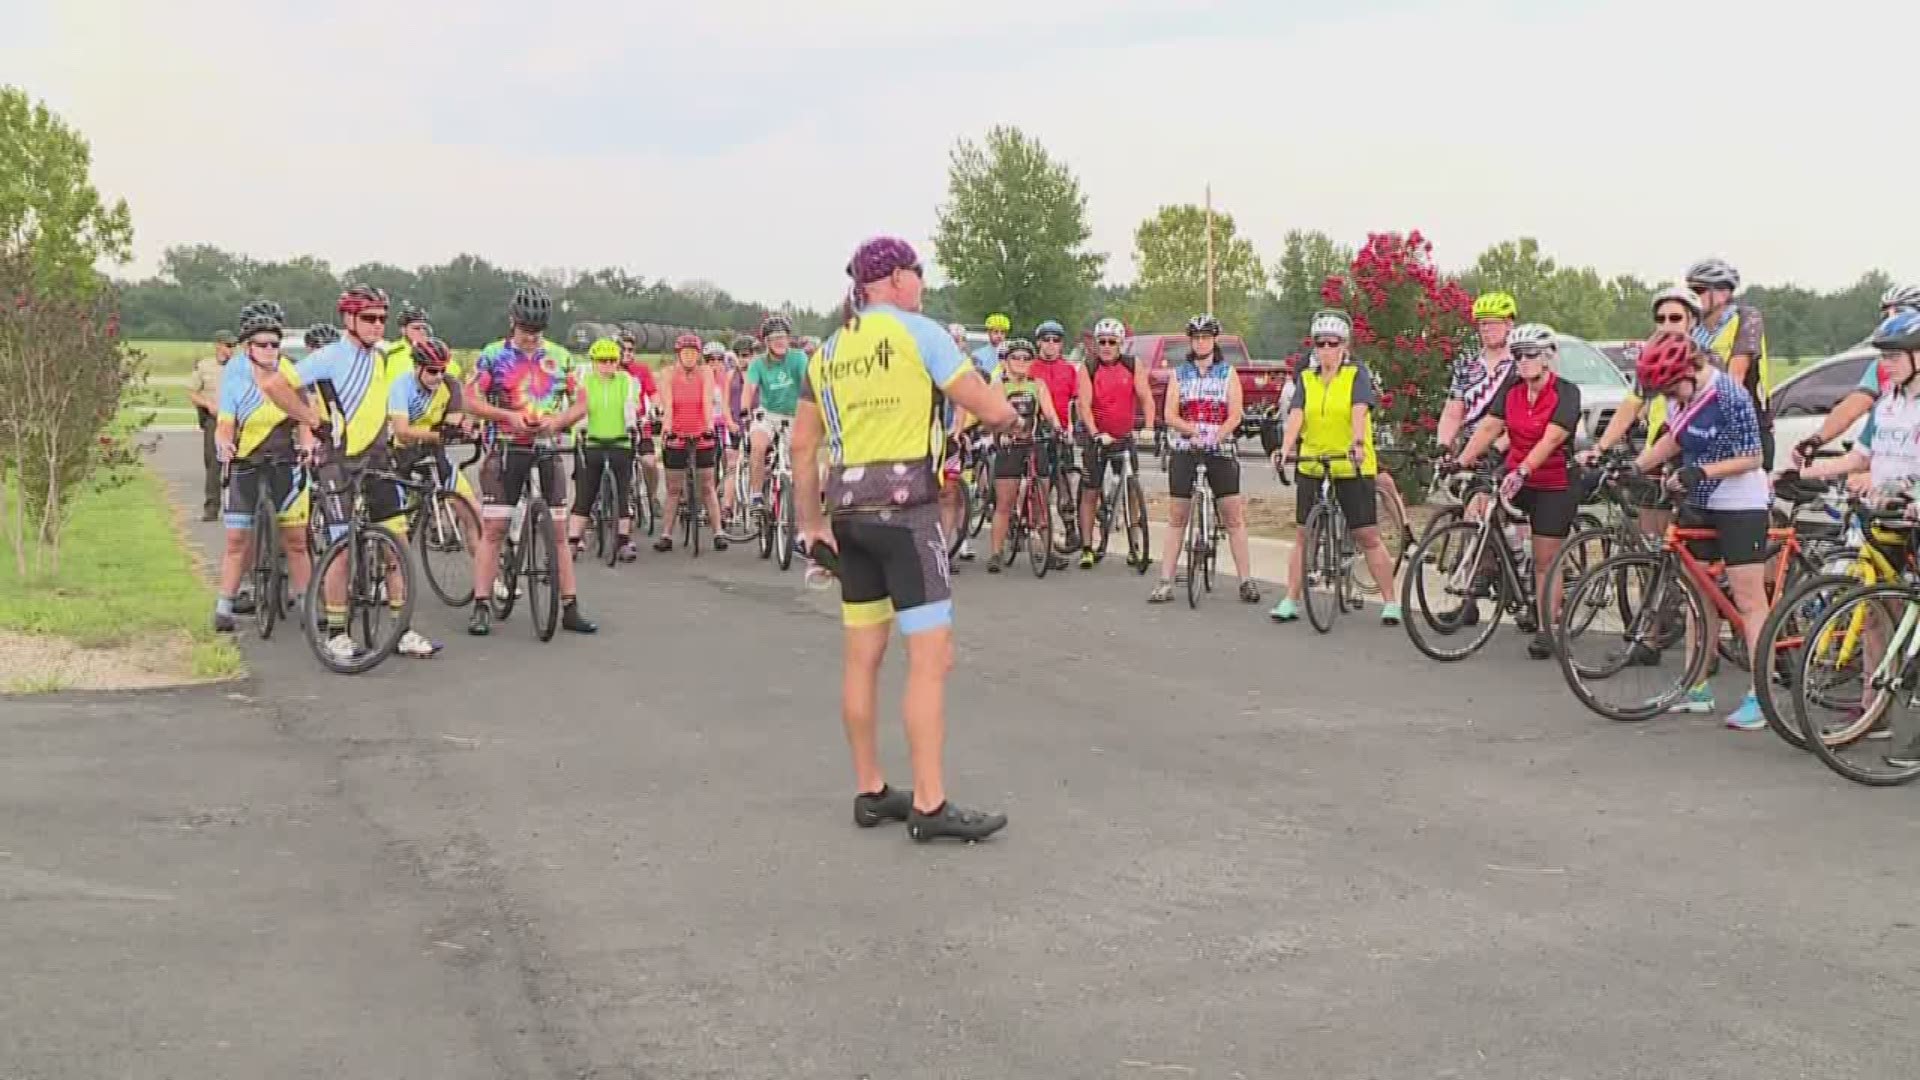 John Mundell was killed while cycling last July. His good friend Jim Krause, who lead his memorial ride, tragically died this weekend during the Big Dam Bridge 100.